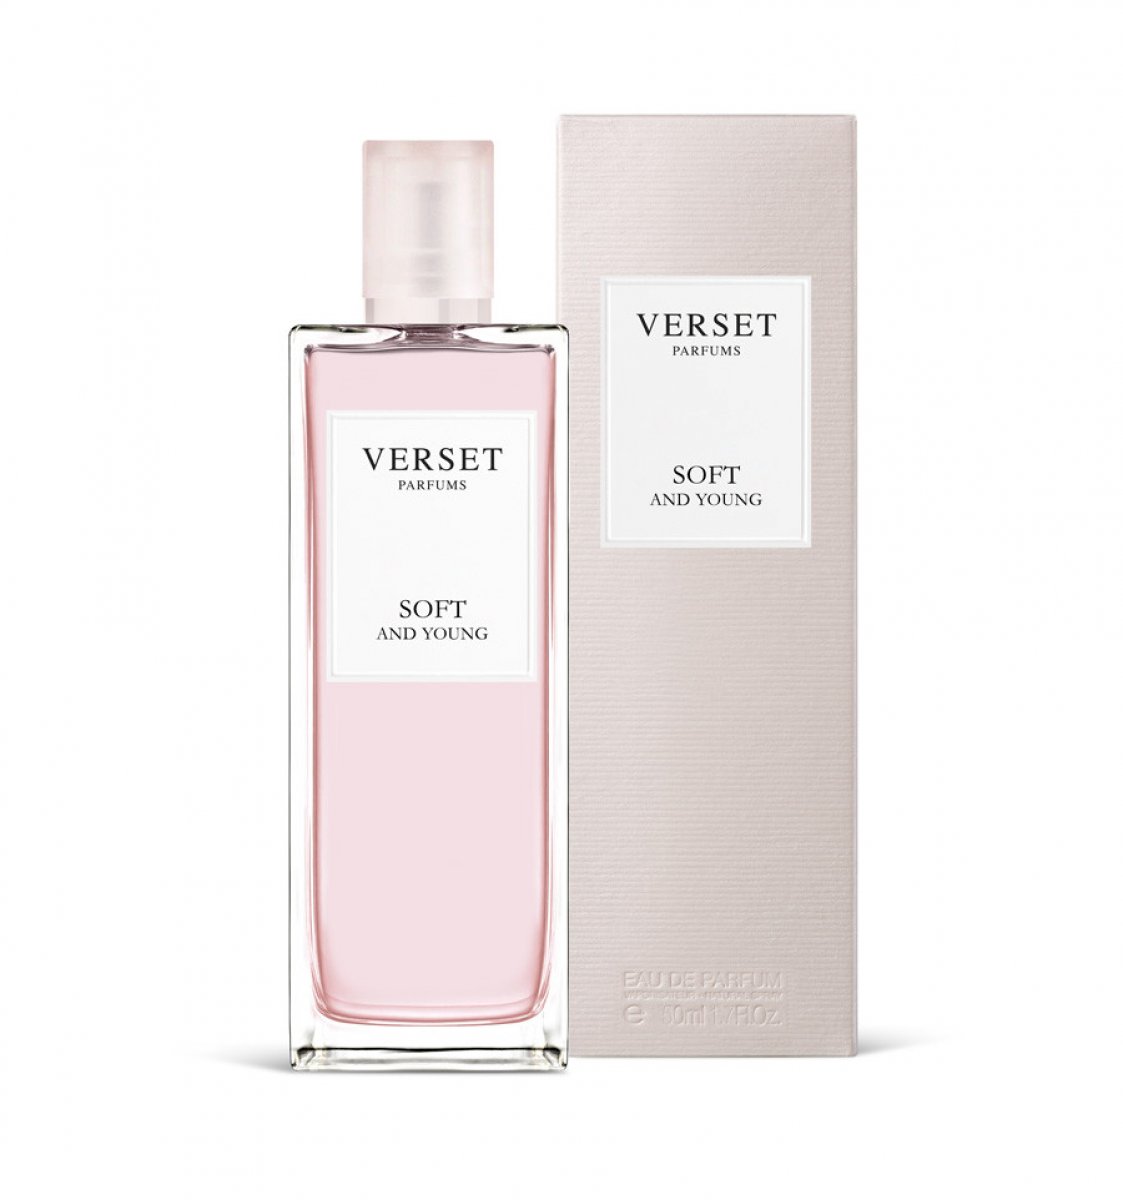 VERSET PARFUMS - SOFT AND YOUNG - 50 ml Liberamente ispirato a 